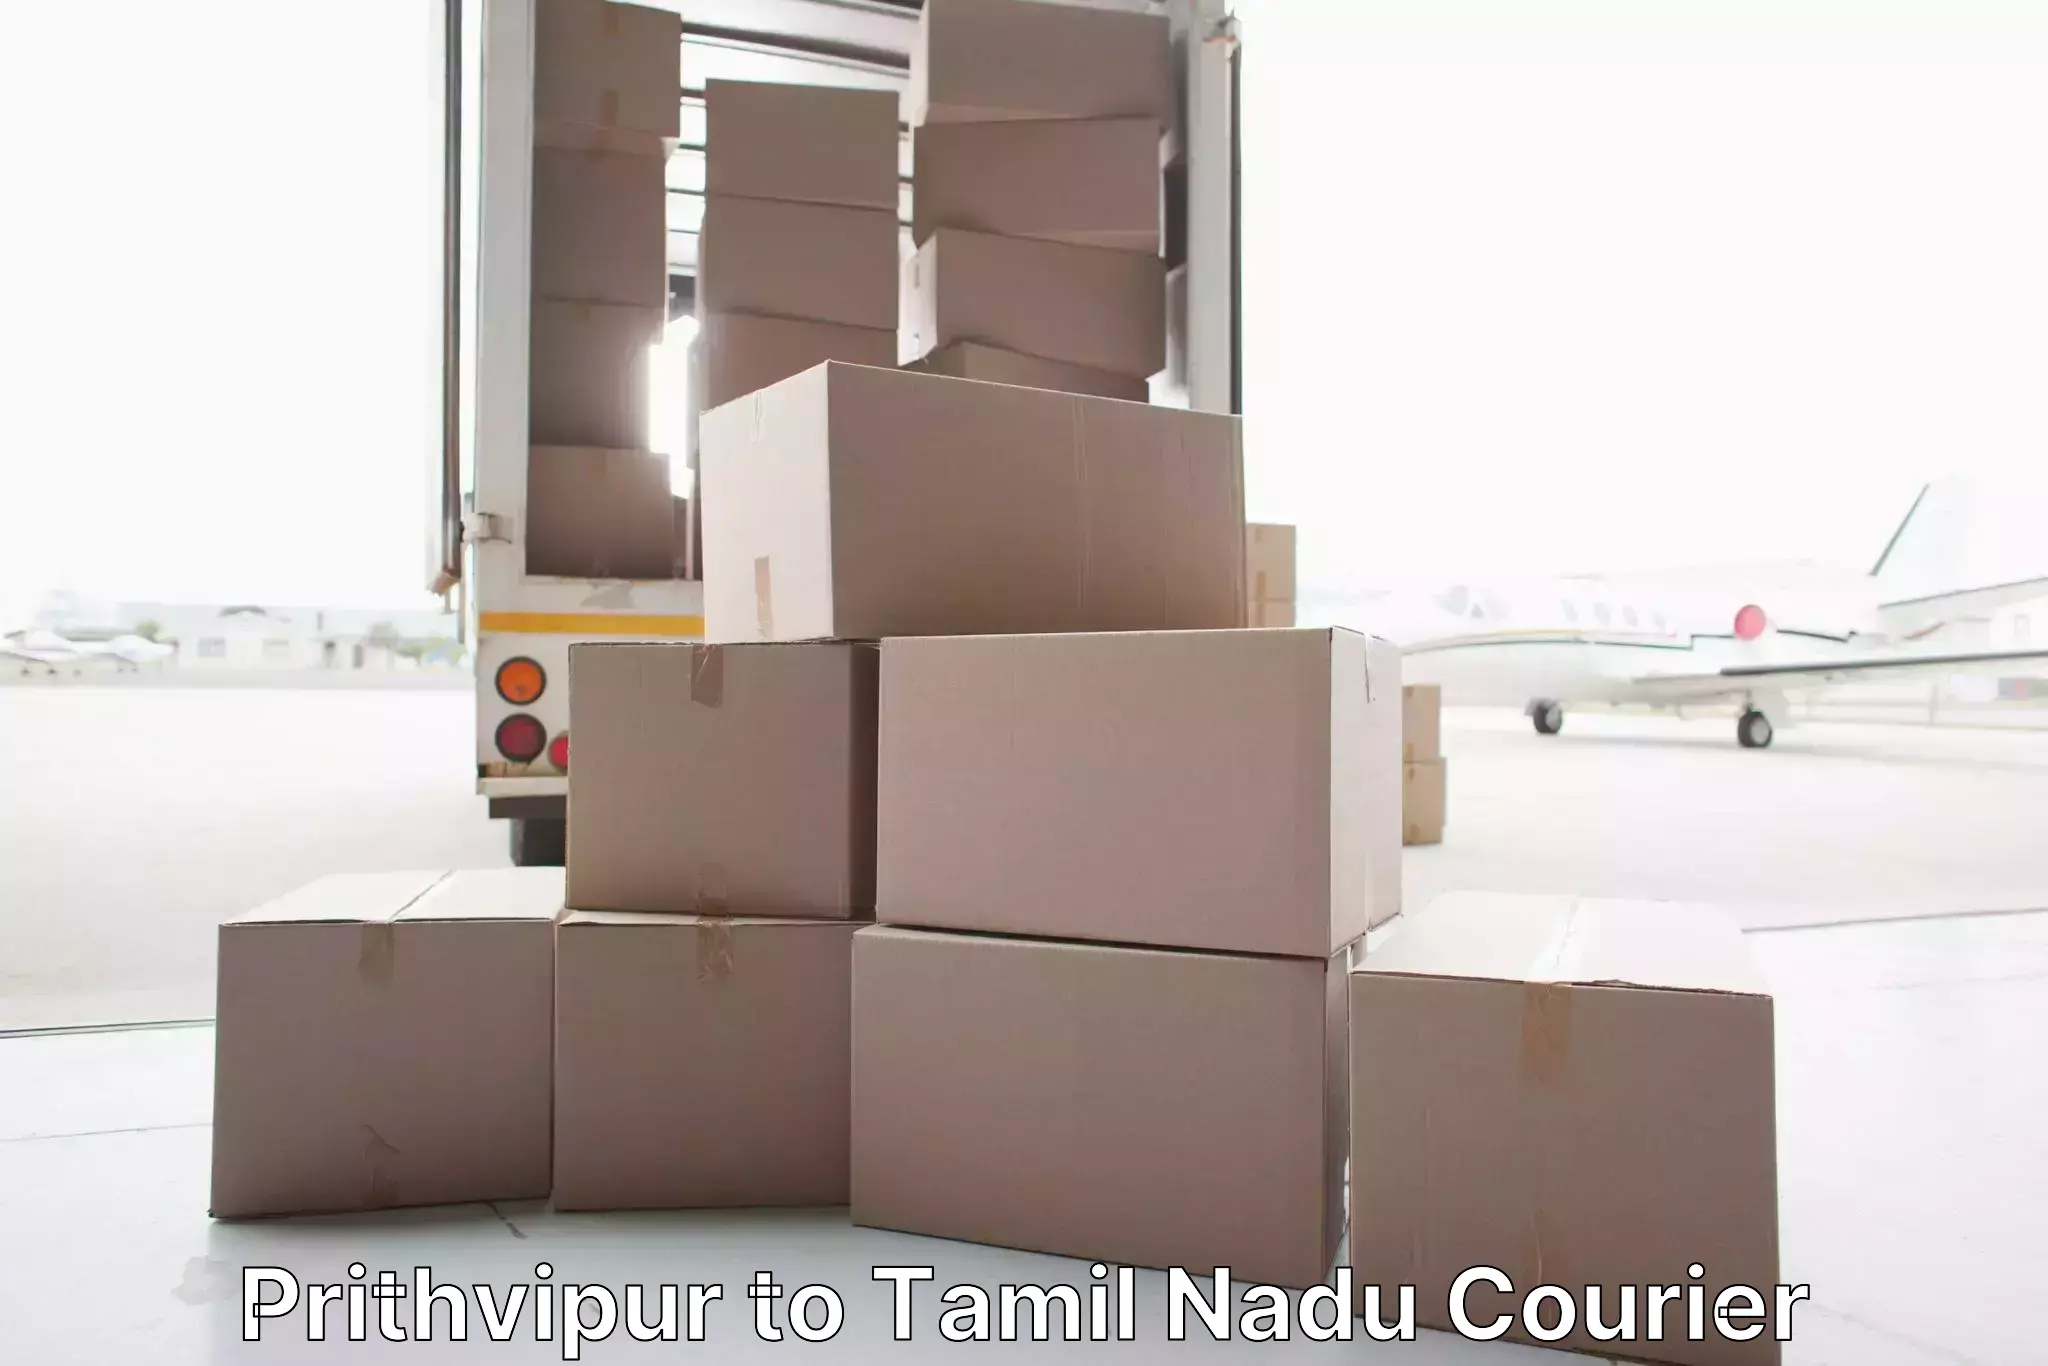 Reliable movers Prithvipur to Anthiyur